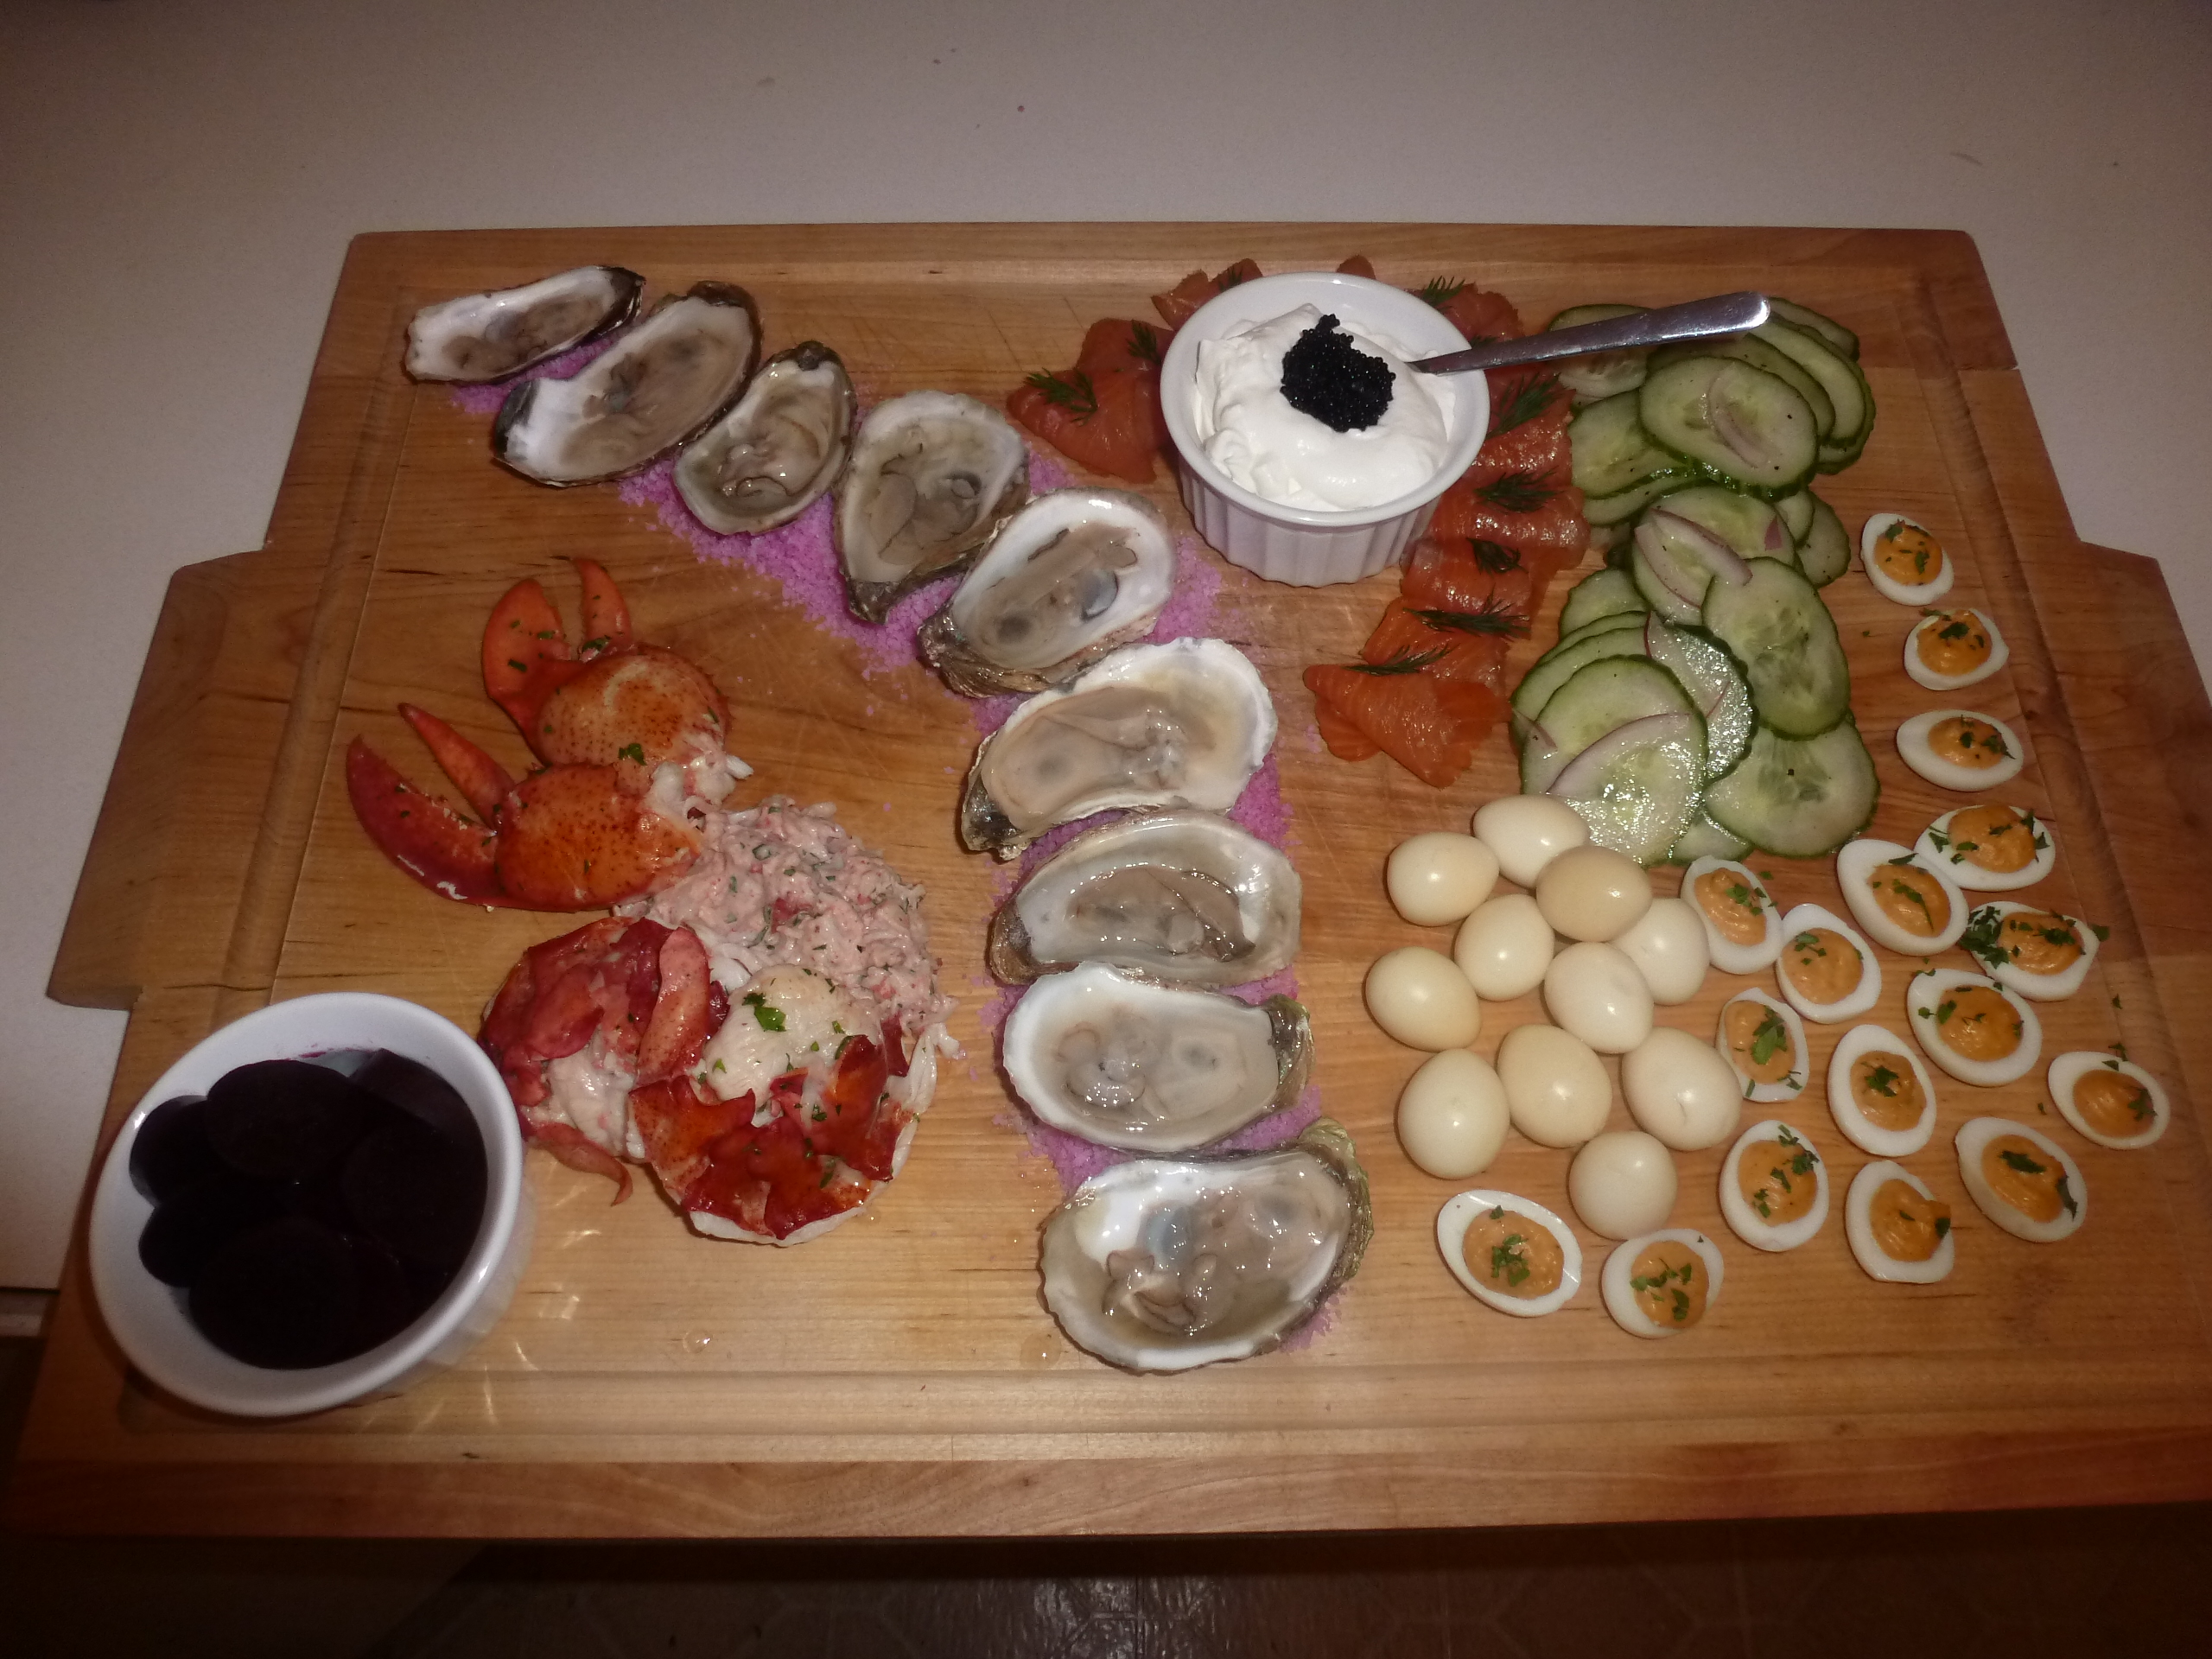 Seafood platter: cold poached lobster, Malpeque oysters, smoked salmon, crème fraîche with caviar, cucumber salad, pickled and devilled quail eggs